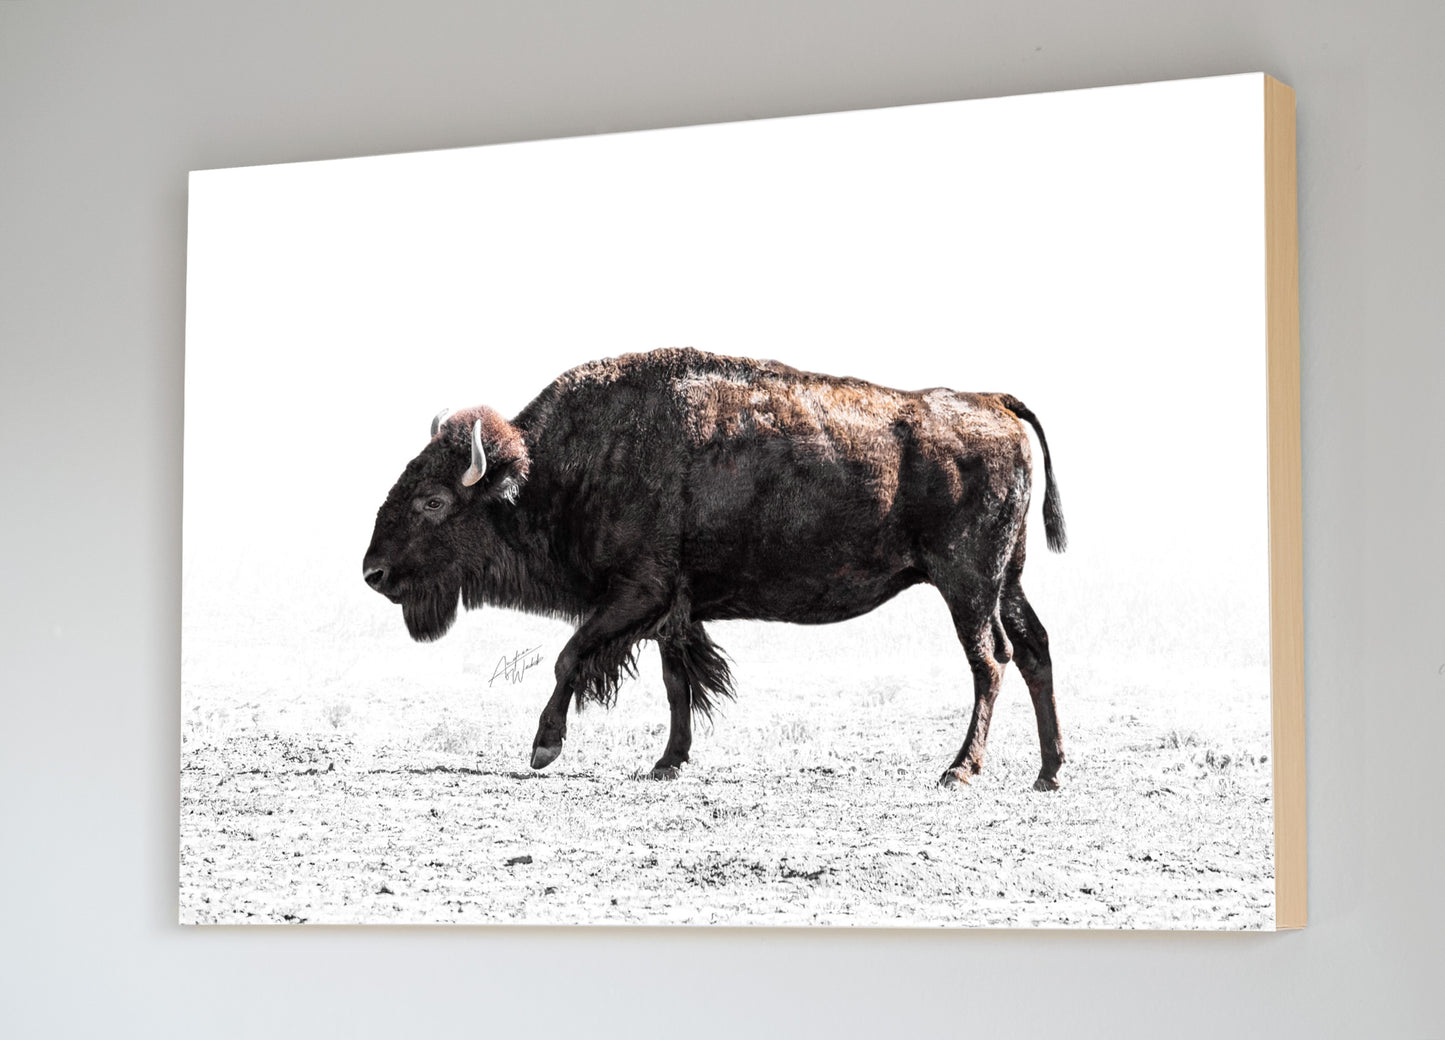 This beautiful American Bison is featured on a white background and is surrounded by grass blade shadows. This makes an interesting portrait for your home, office, or nursery wall decor, whether you're looking for something artistic or simply want something fun to hang around the house. Bison gift. Bison artwork. Bison art. Buffalo art. Buffalo artwork. Buffalo gifts. Bison stationary. Buffalo Stationary. Animal Photography